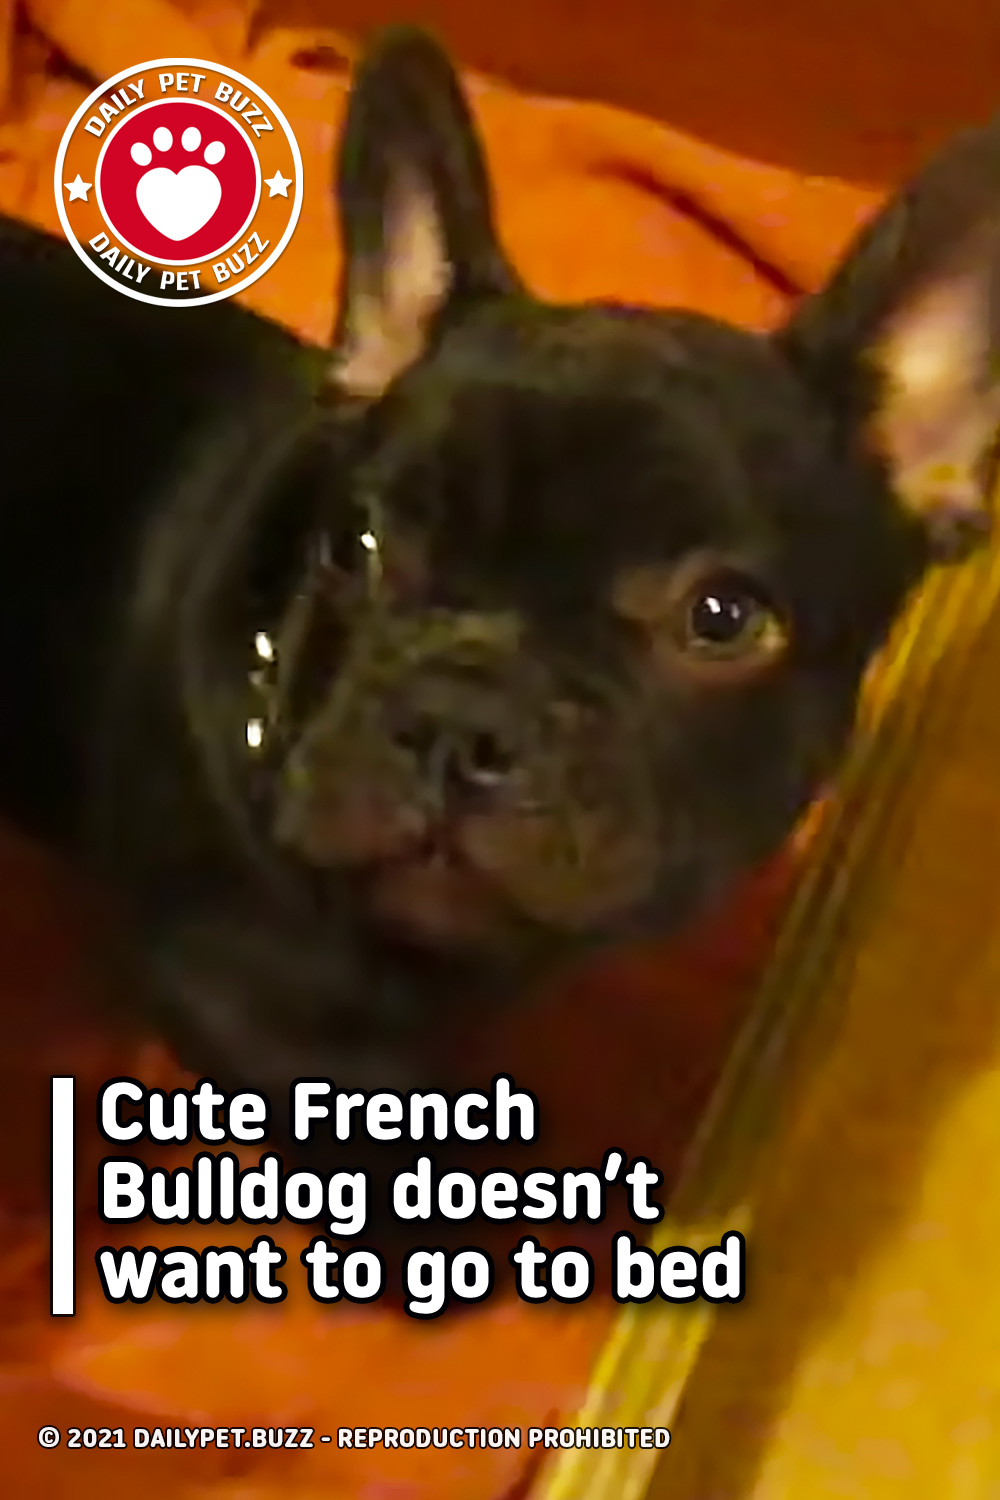 Cute French Bulldog doesn’t want to go to bed